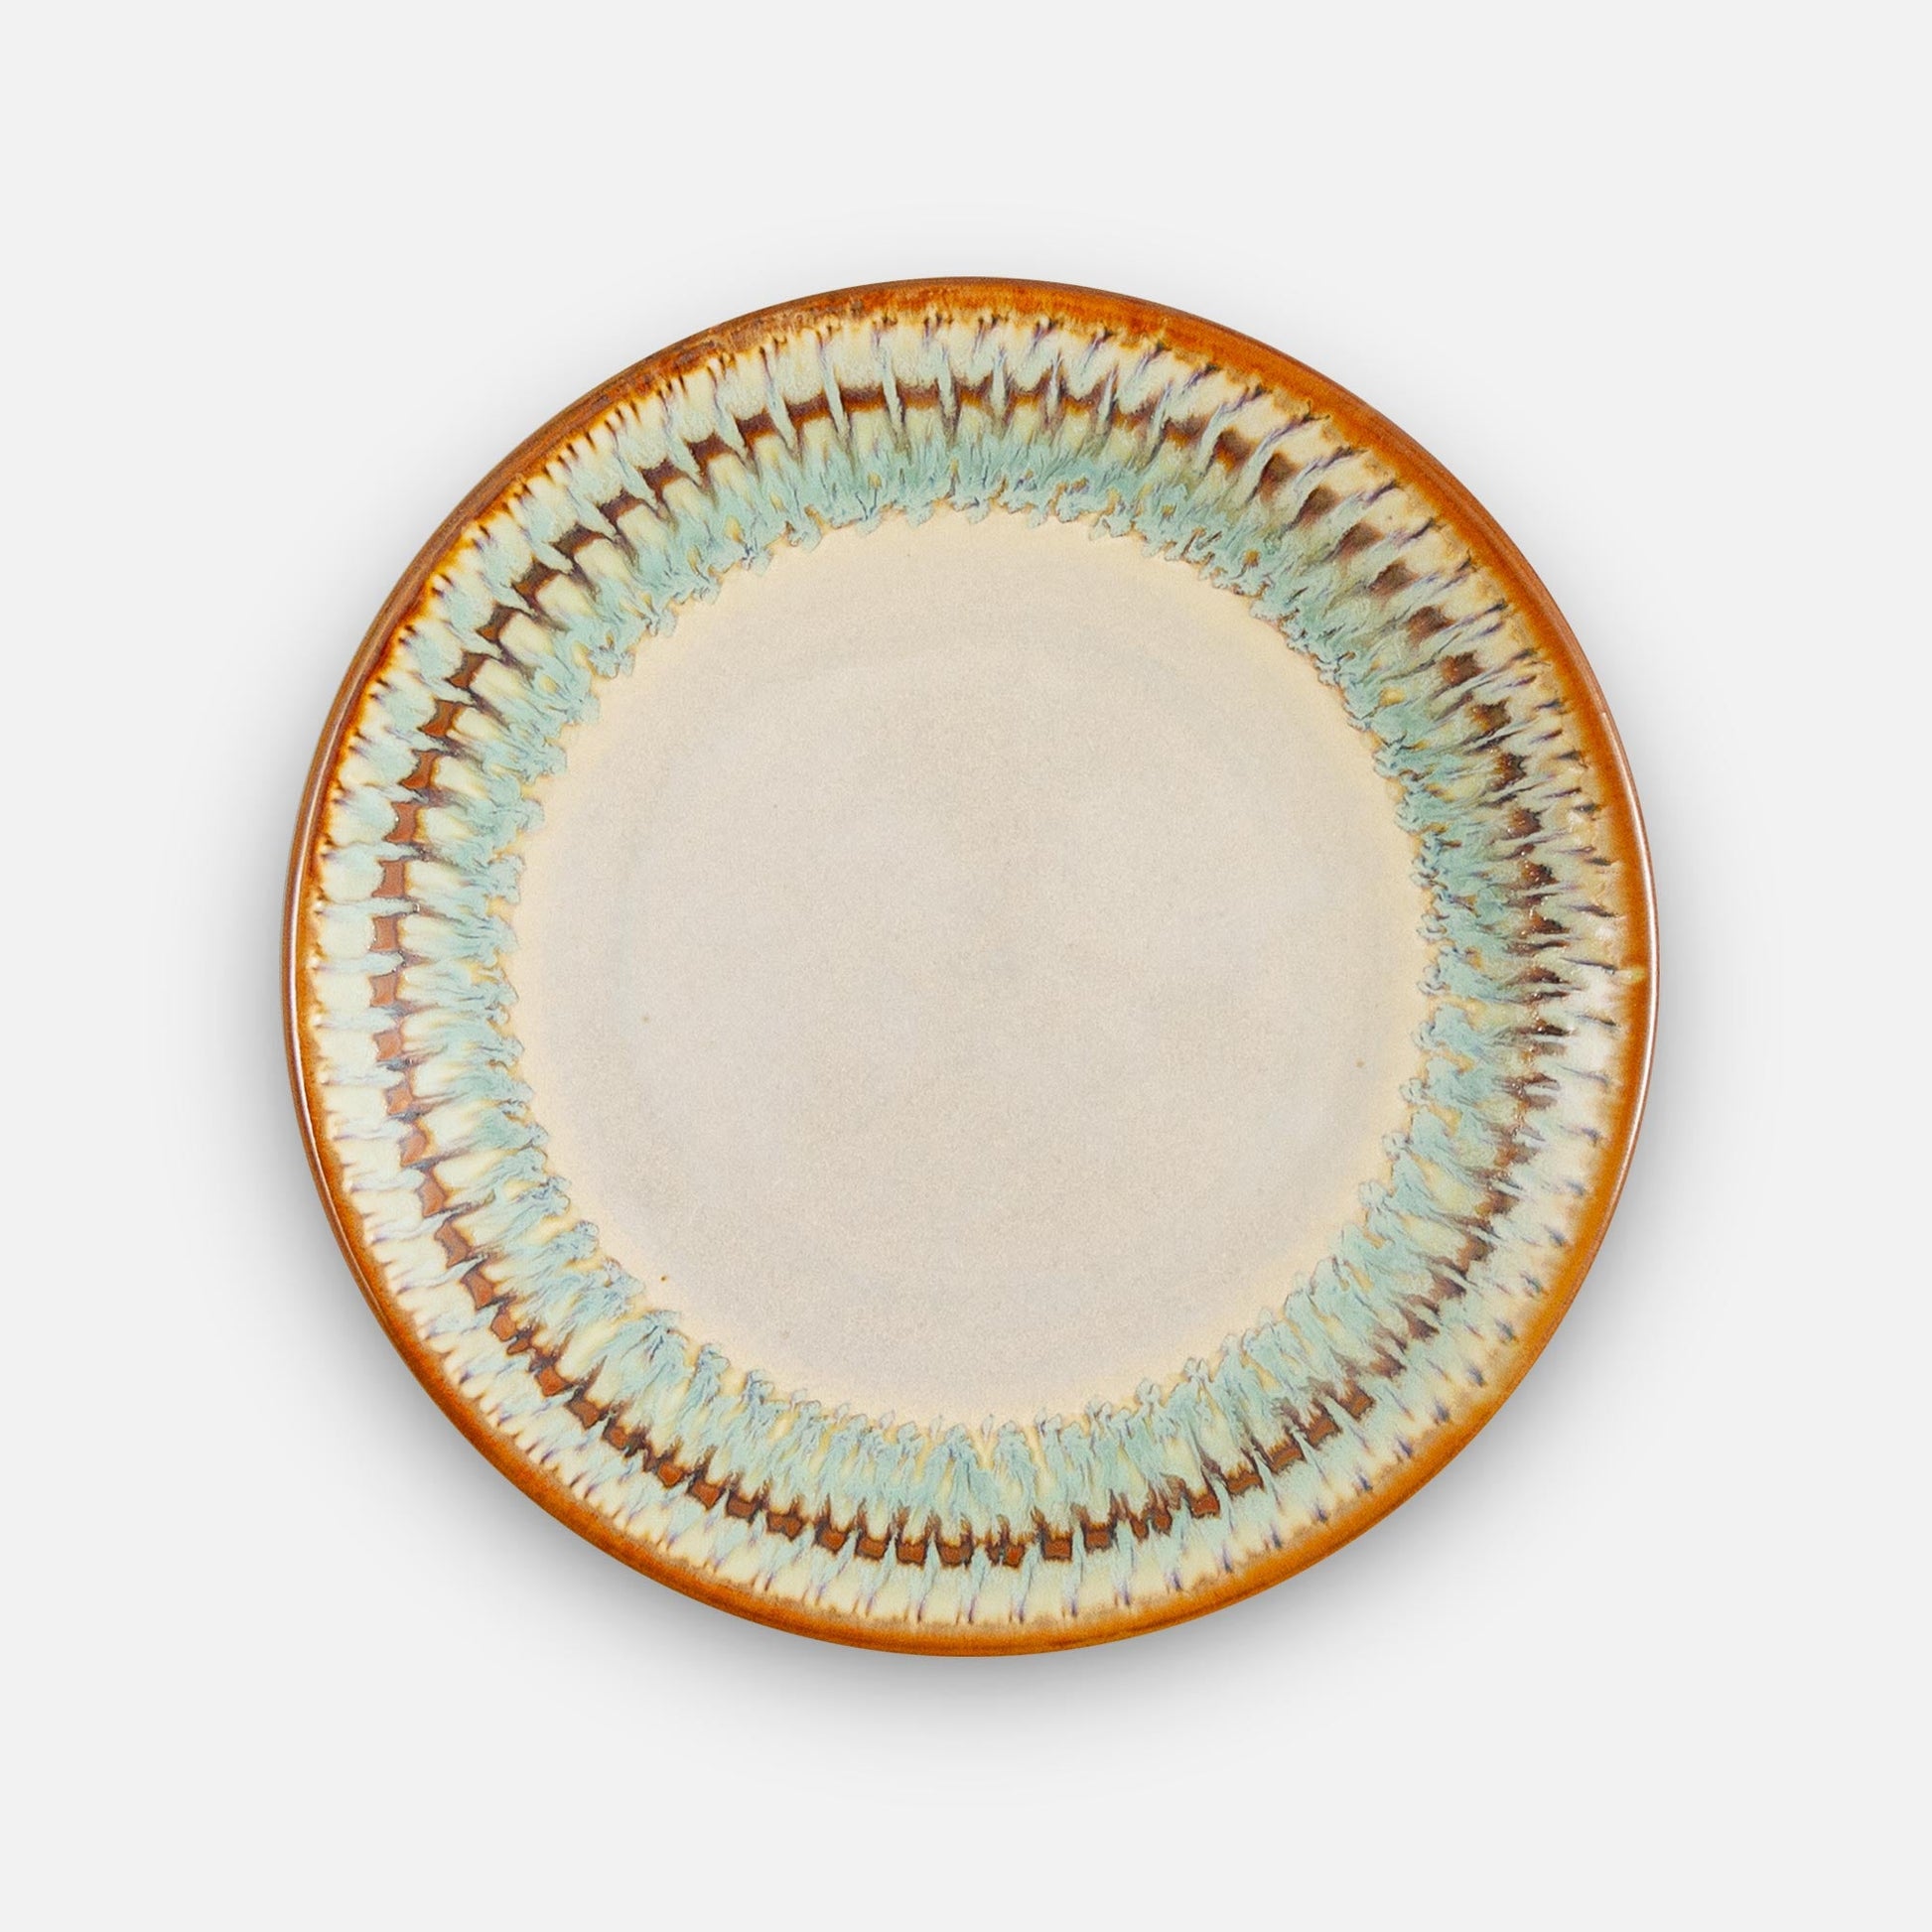 Handmade Pottery Rimless Dessert Plate made by Georgetown Pottery in Maine in Ivory Green Oribe pattern